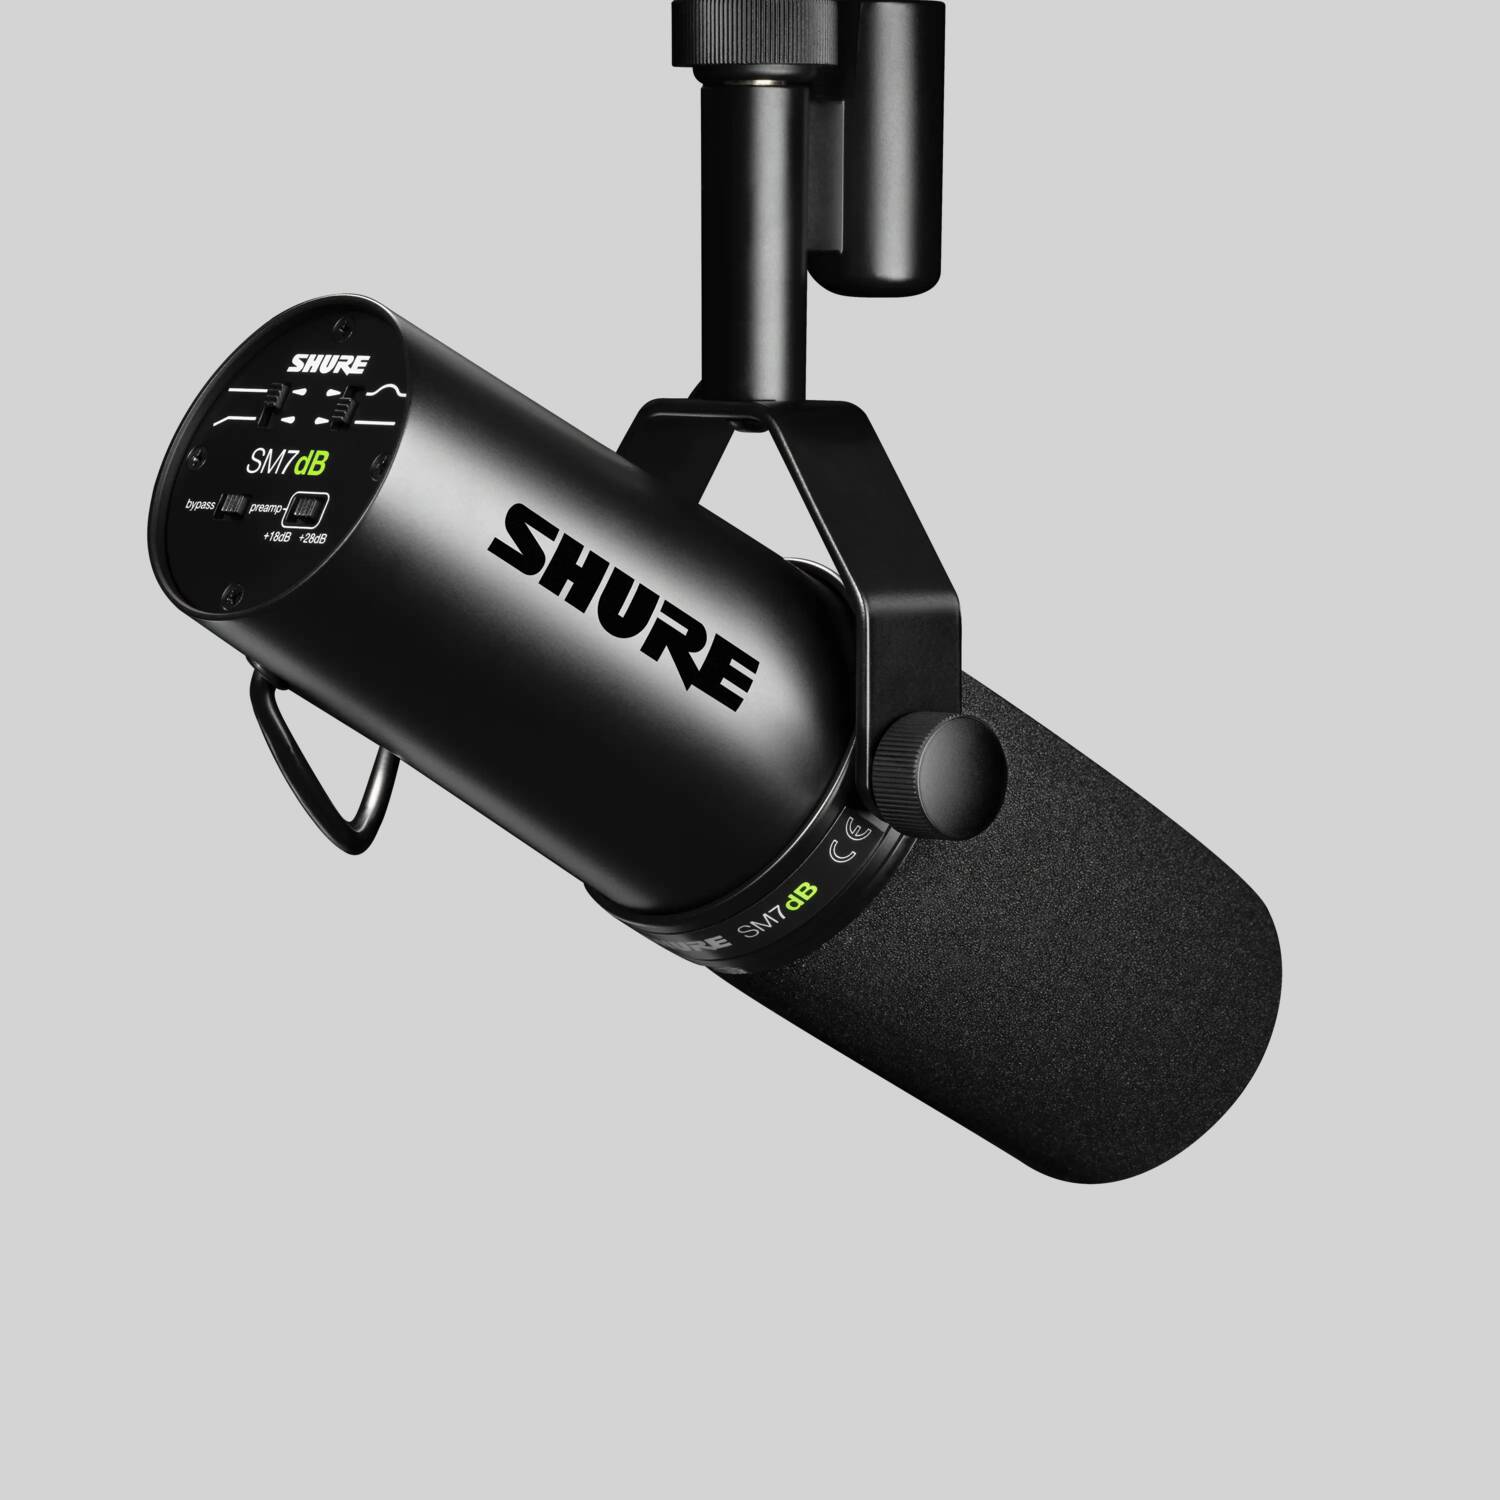 Ultimate Unboxing: Shure SM7dB Microphone Live! 